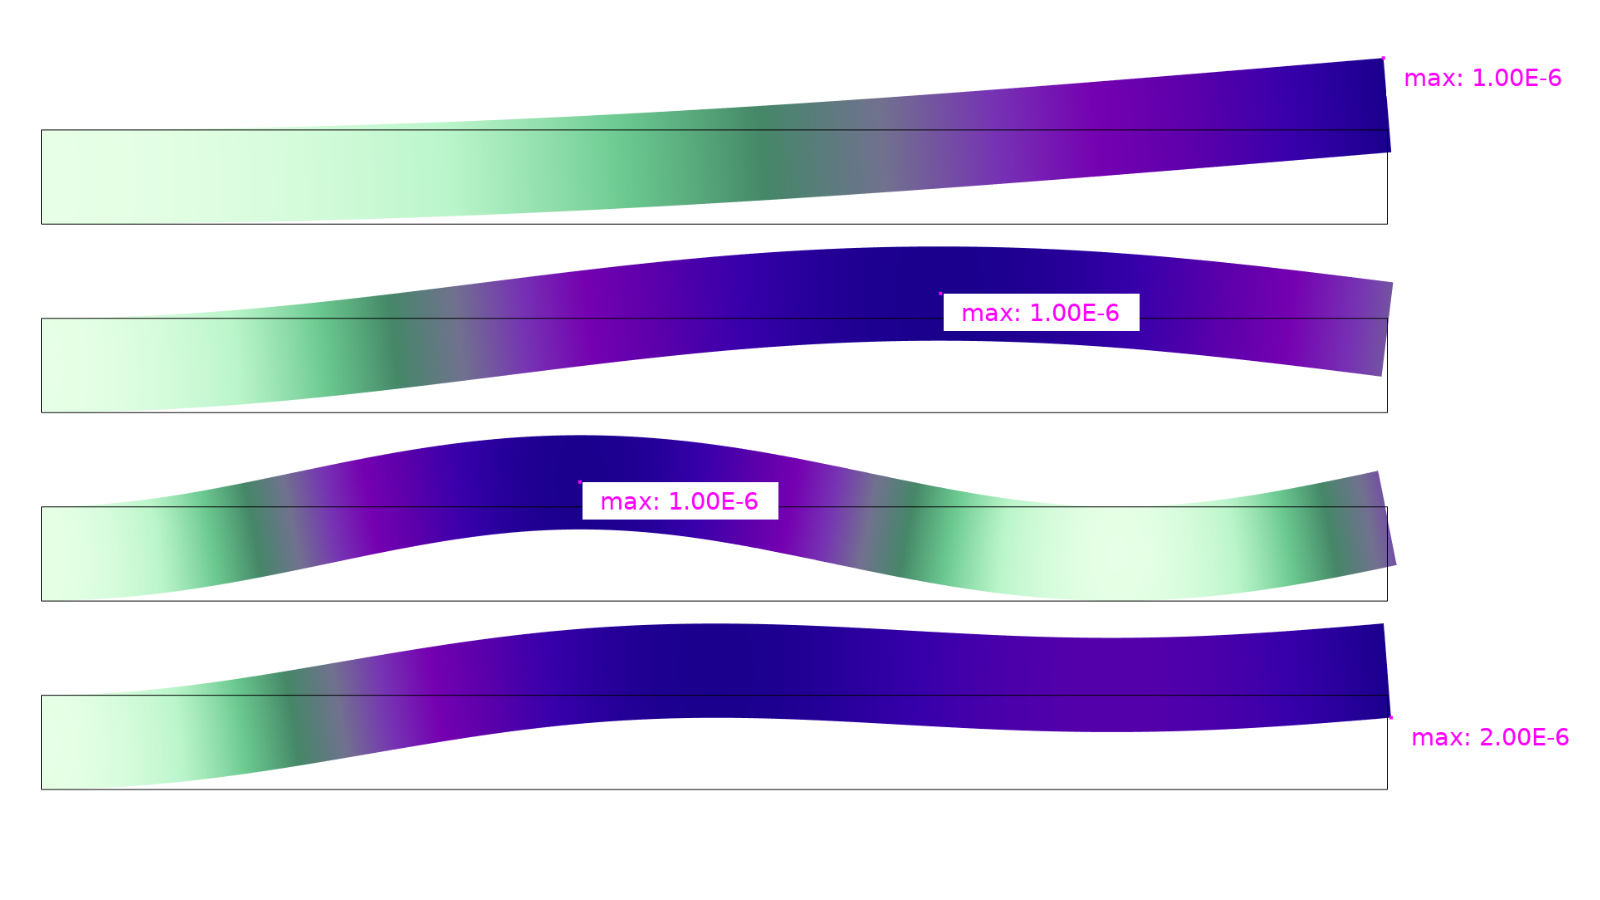 Four plots are shown in the AuroraBorealis color table. The first three buckling modes for an Euler 2 column are shown in the first three plots, while the bottom plot displays the pure superposition of these modes.